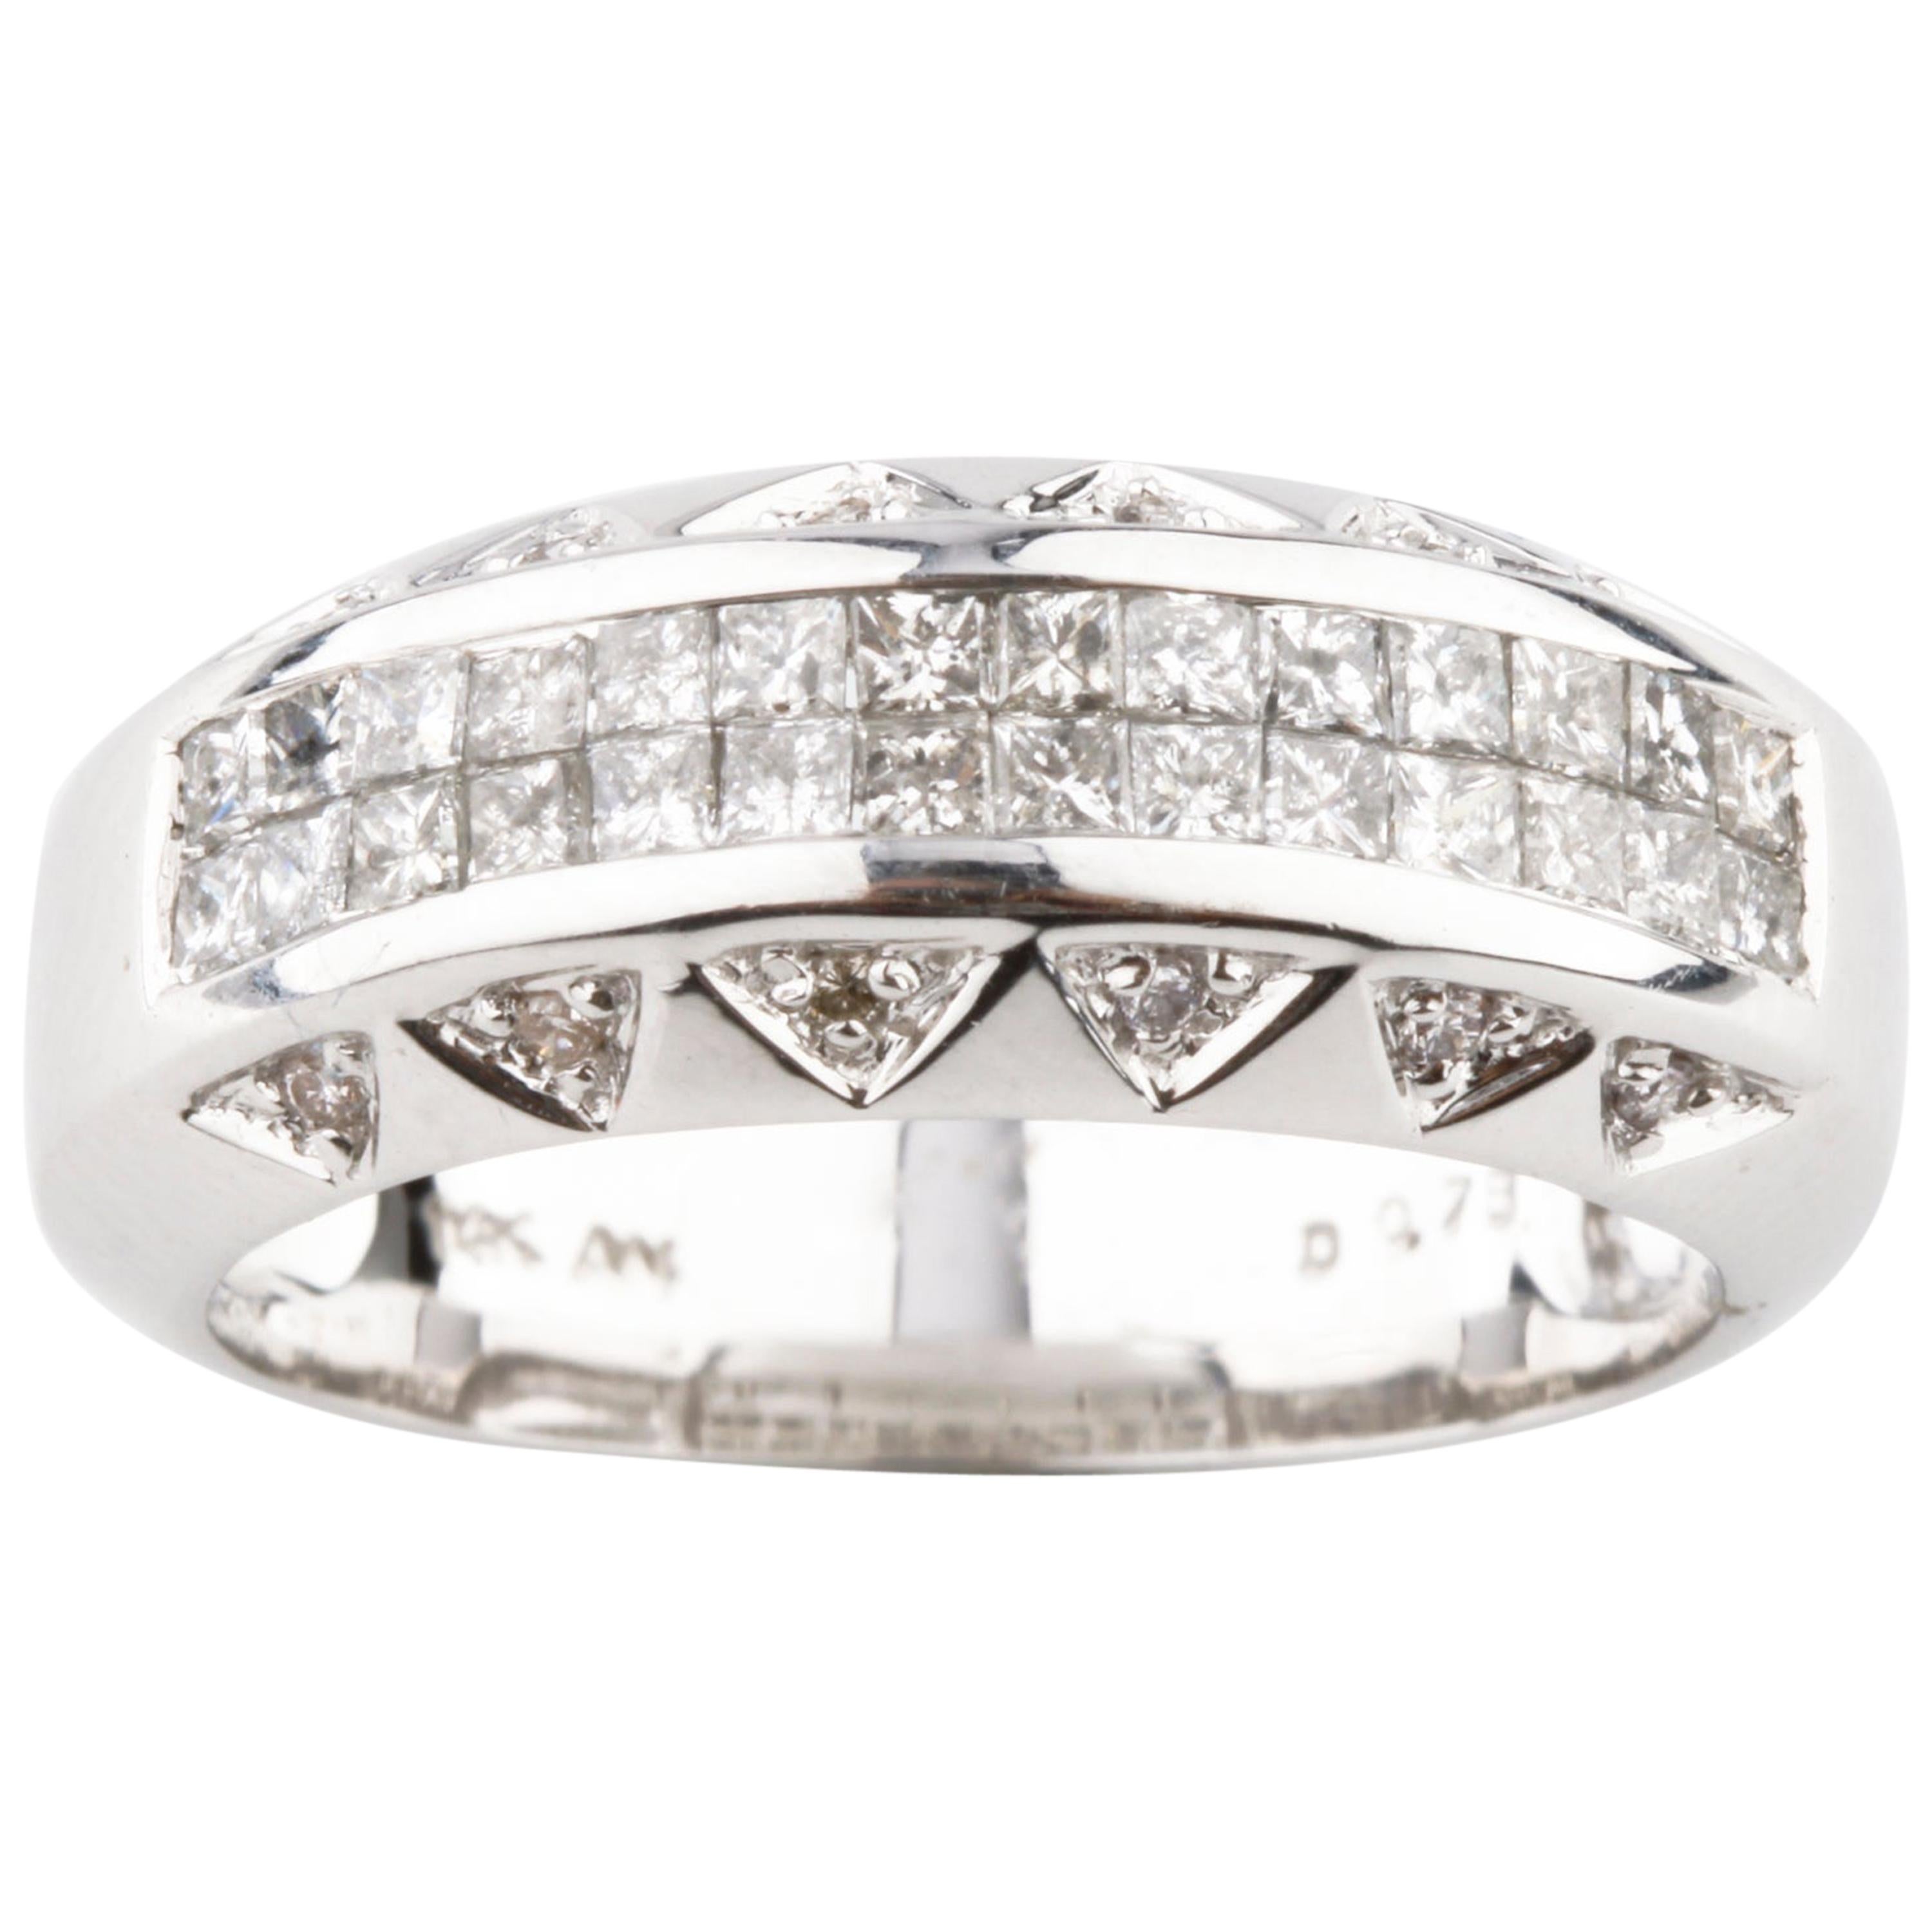 0.76 Carat Diamond Plaque Band Ring in White Gold For Sale